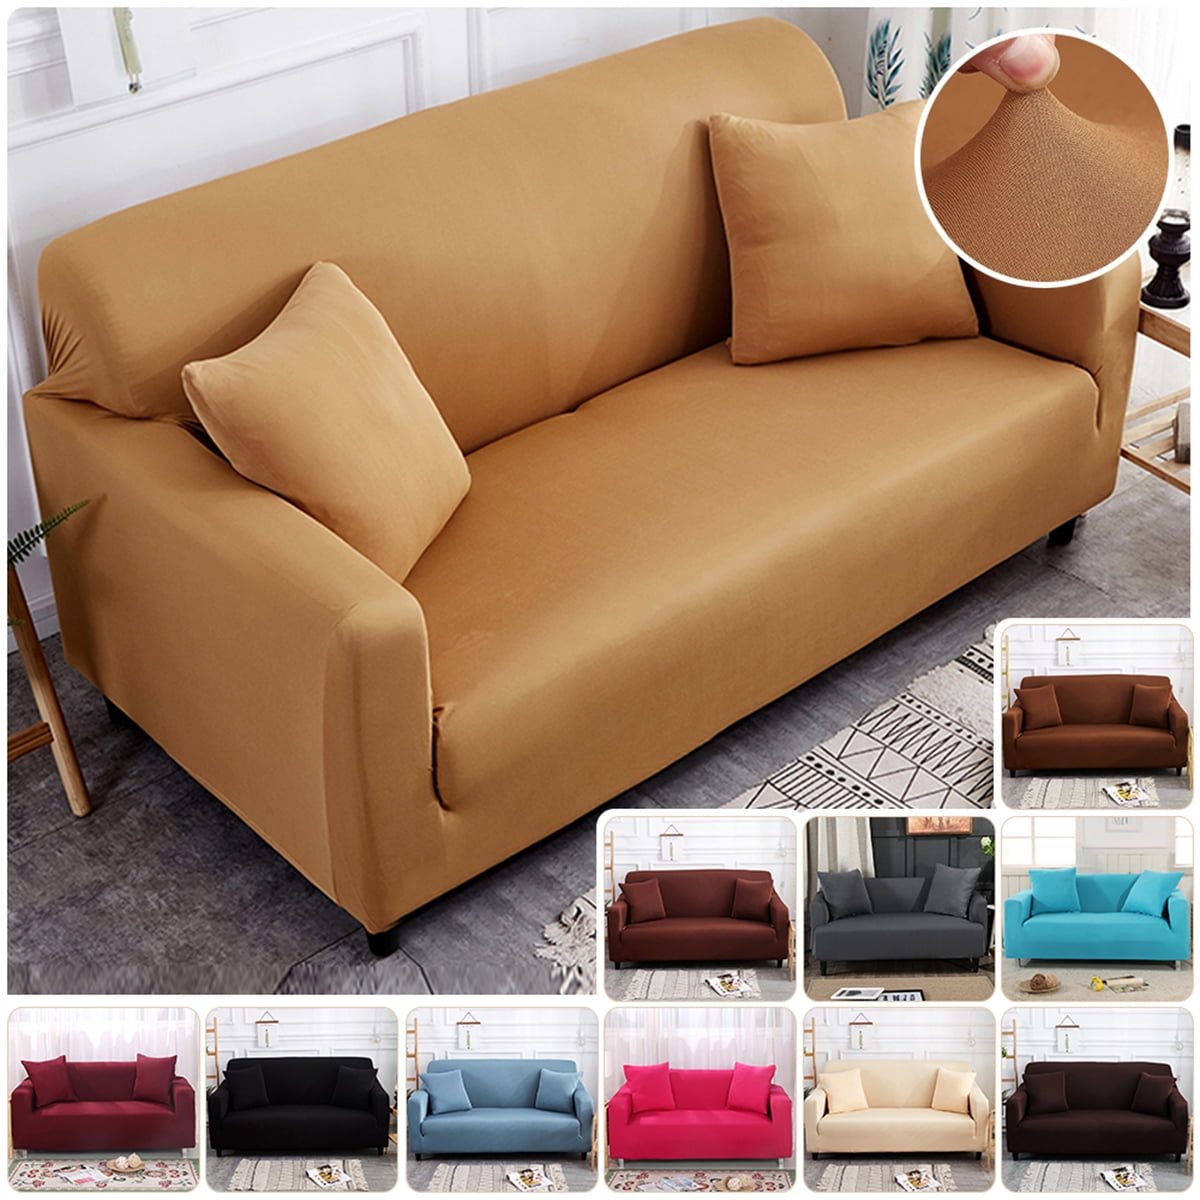 Details about   Elastic Slip Cover Spandex Stretch Sofa Couch Cover Furniture Protector L-Shape 